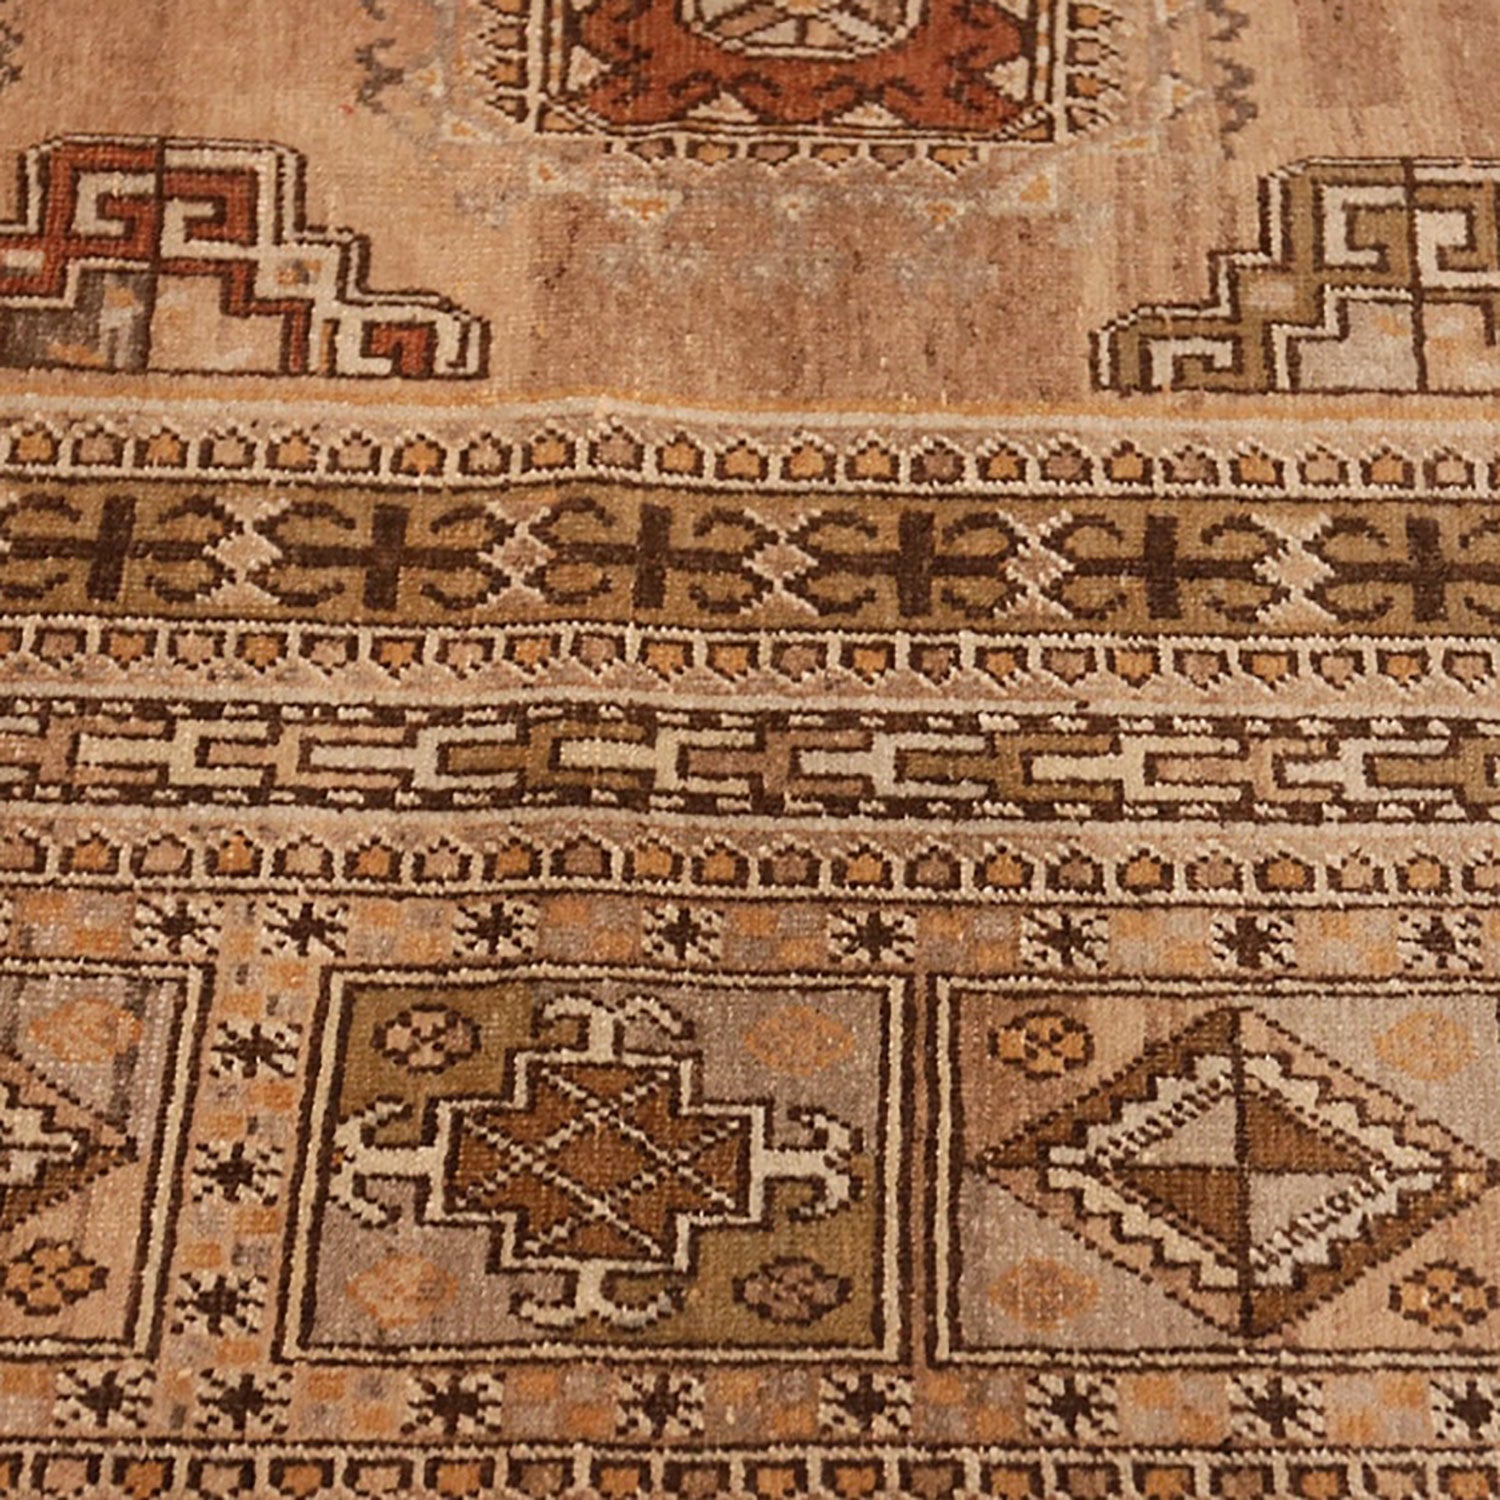 Intricate geometric patterns and earthy tones adorn this traditional rug.